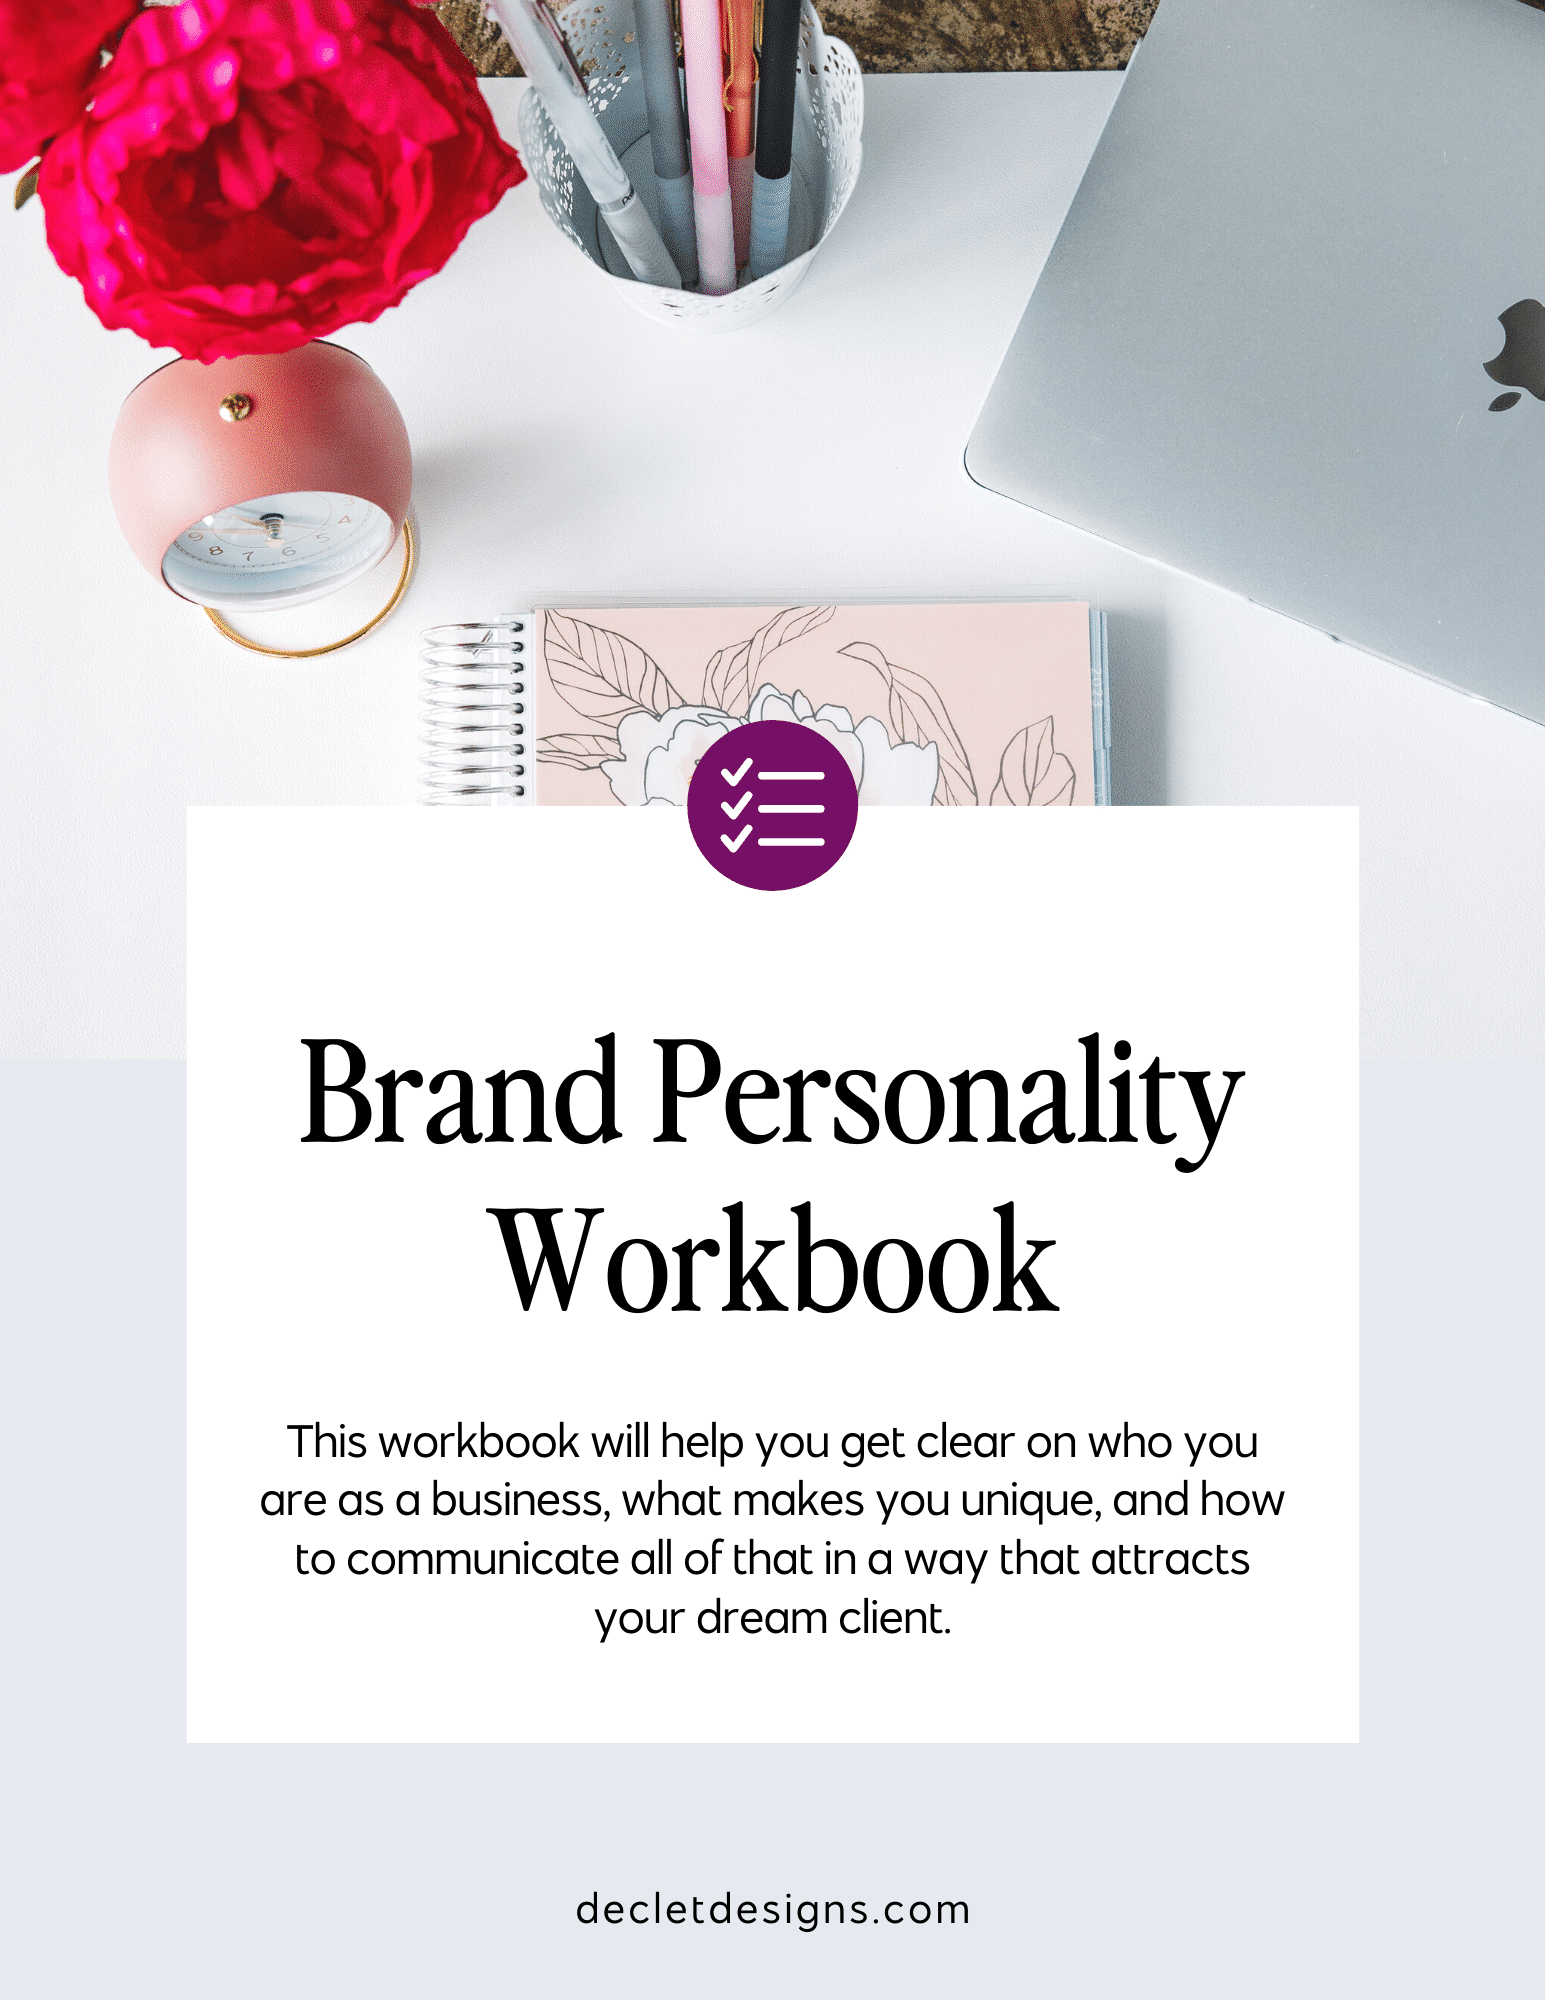 Brand personality workbook for private practice dietitian